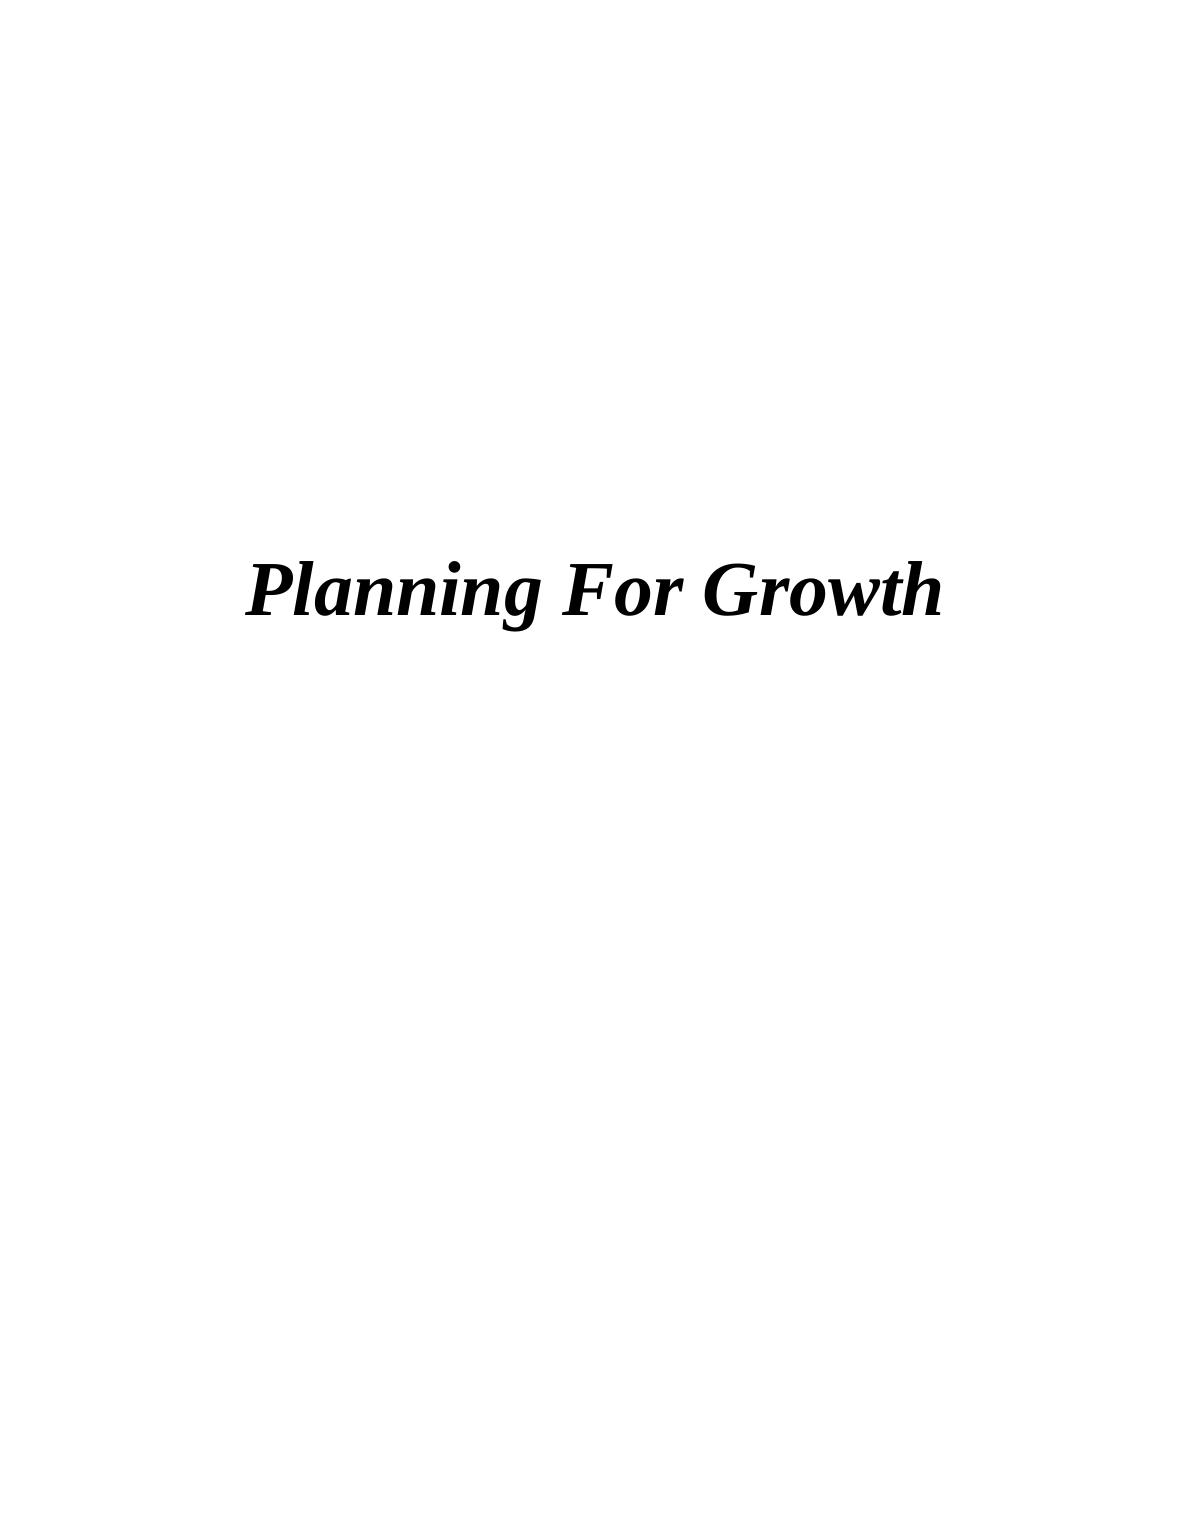 Planning For Growth - Assignment Solution_1